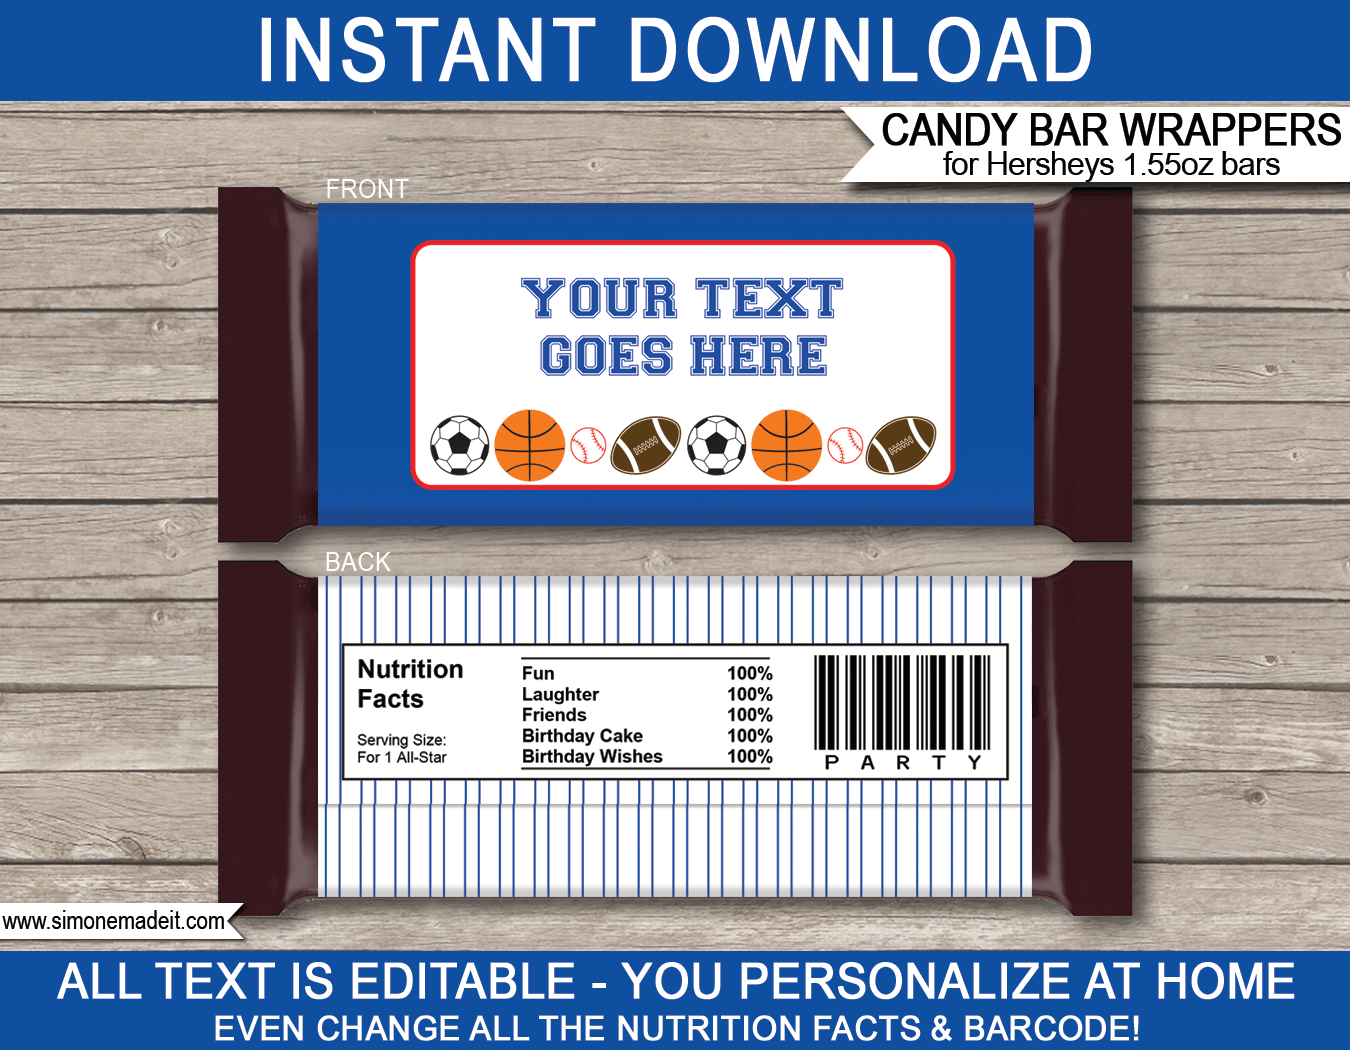 All Star Sports Hershey Candy Bar Wrappers | Birthday Party Favors | Personalized Candy Bars | Editable Template | INSTANT DOWNLOAD $3.00 via simonemadeit.com